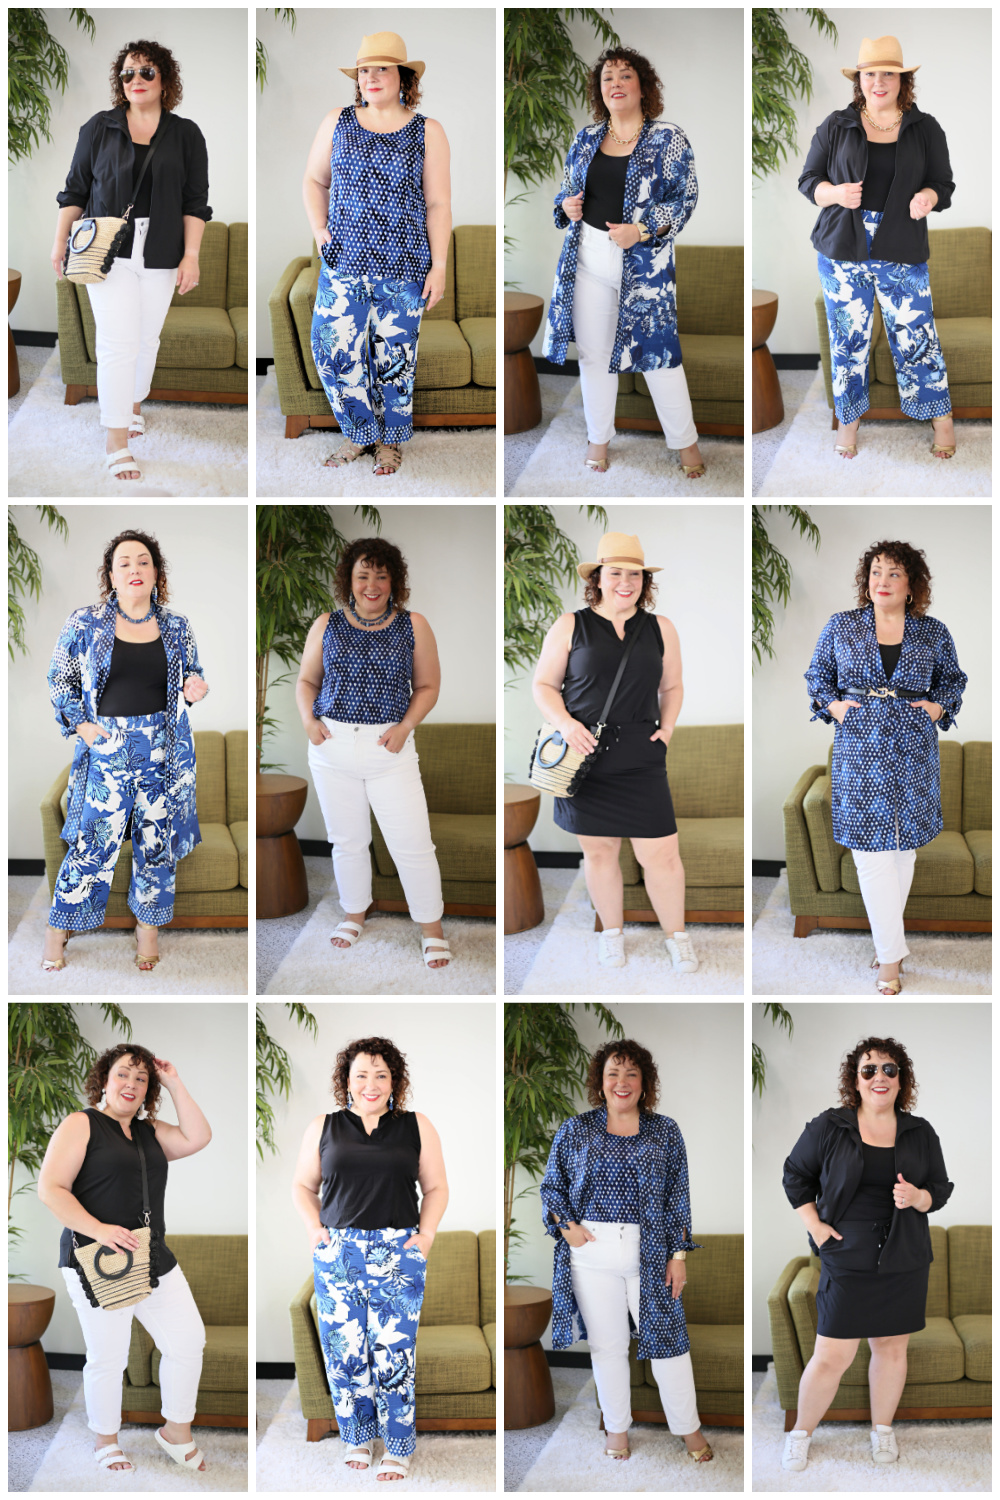 A Blue, Black and White Capsule Wardrobe for Travel